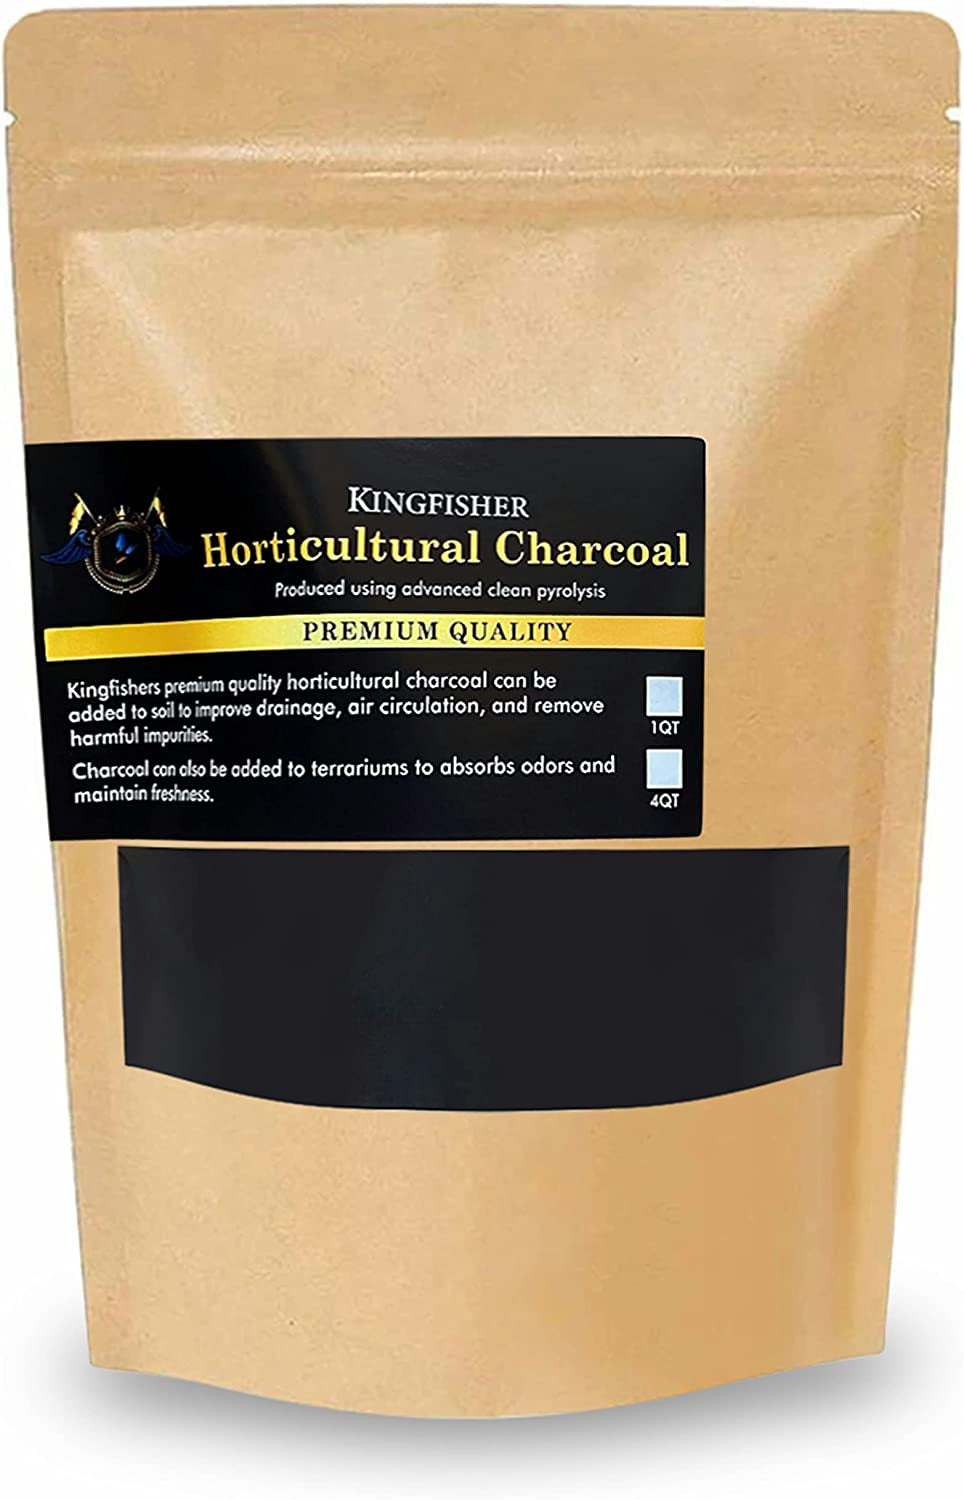 Kingfishers, Kingfishers Organic Horticultural Charcoal & Terrarium Charcoal | Charcoal for Plants | Pure Hardwood Charcoal for Planting and Gardening | (4 Quart)